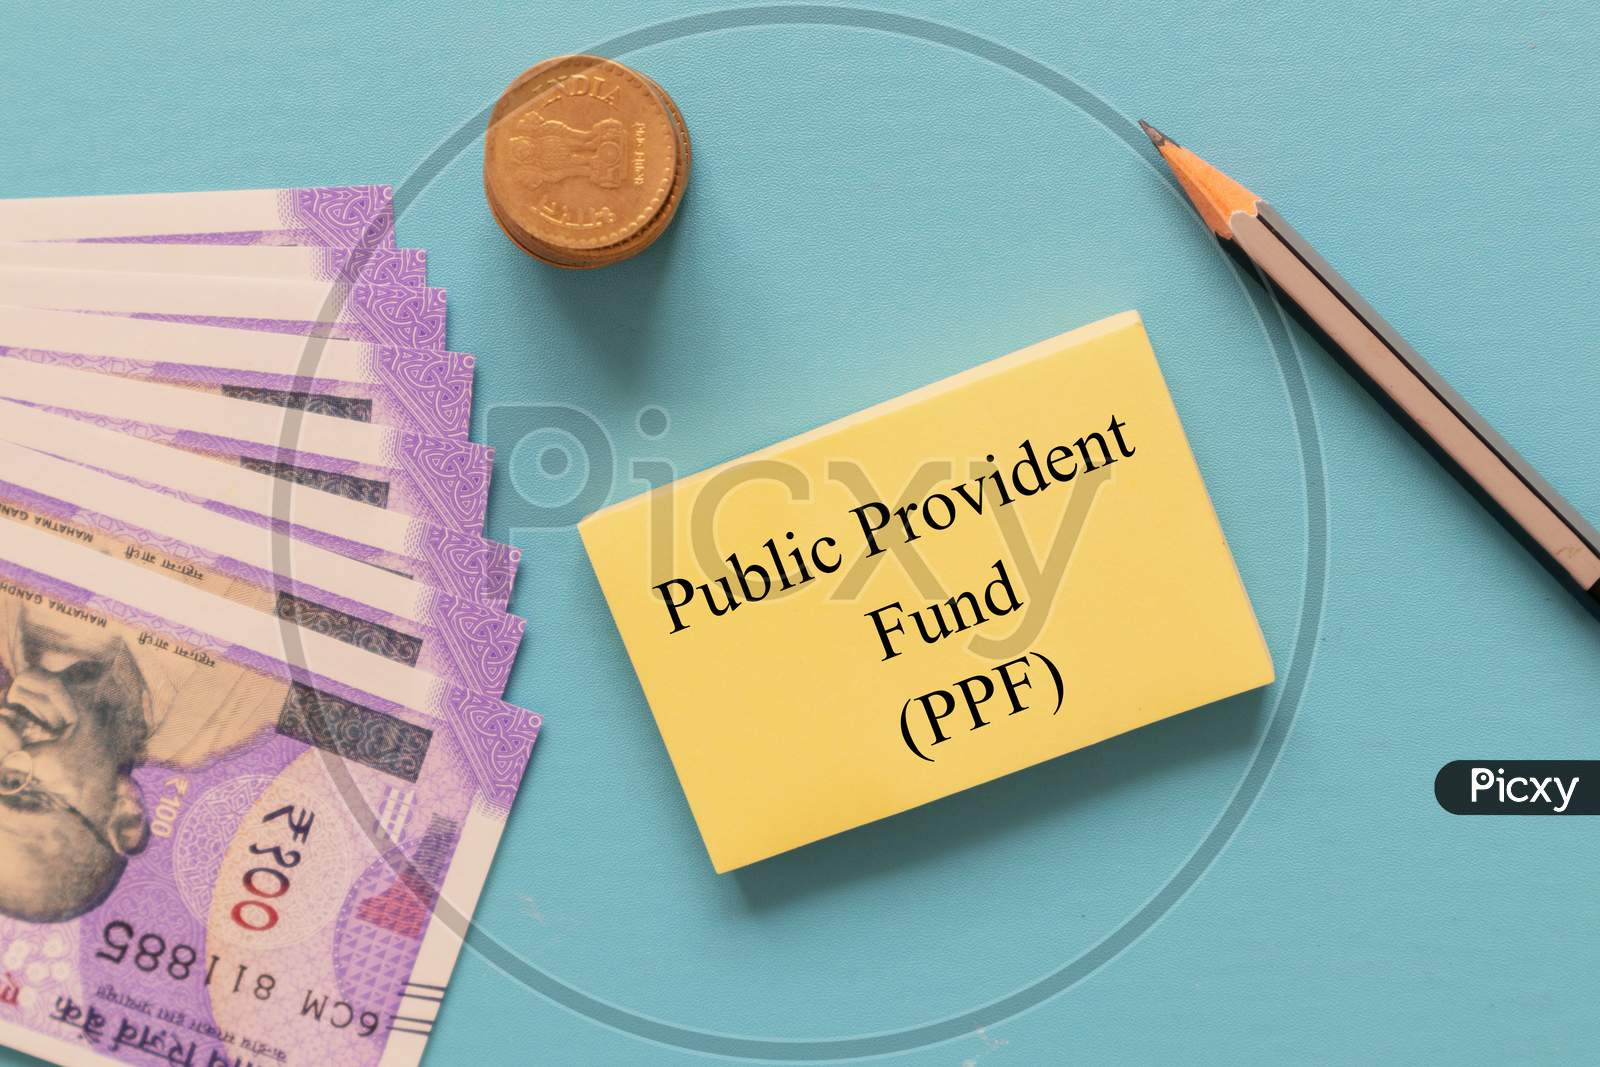 Concept Of Investment In Public Provident Fund Or Ppf With Indian Currency Notes.